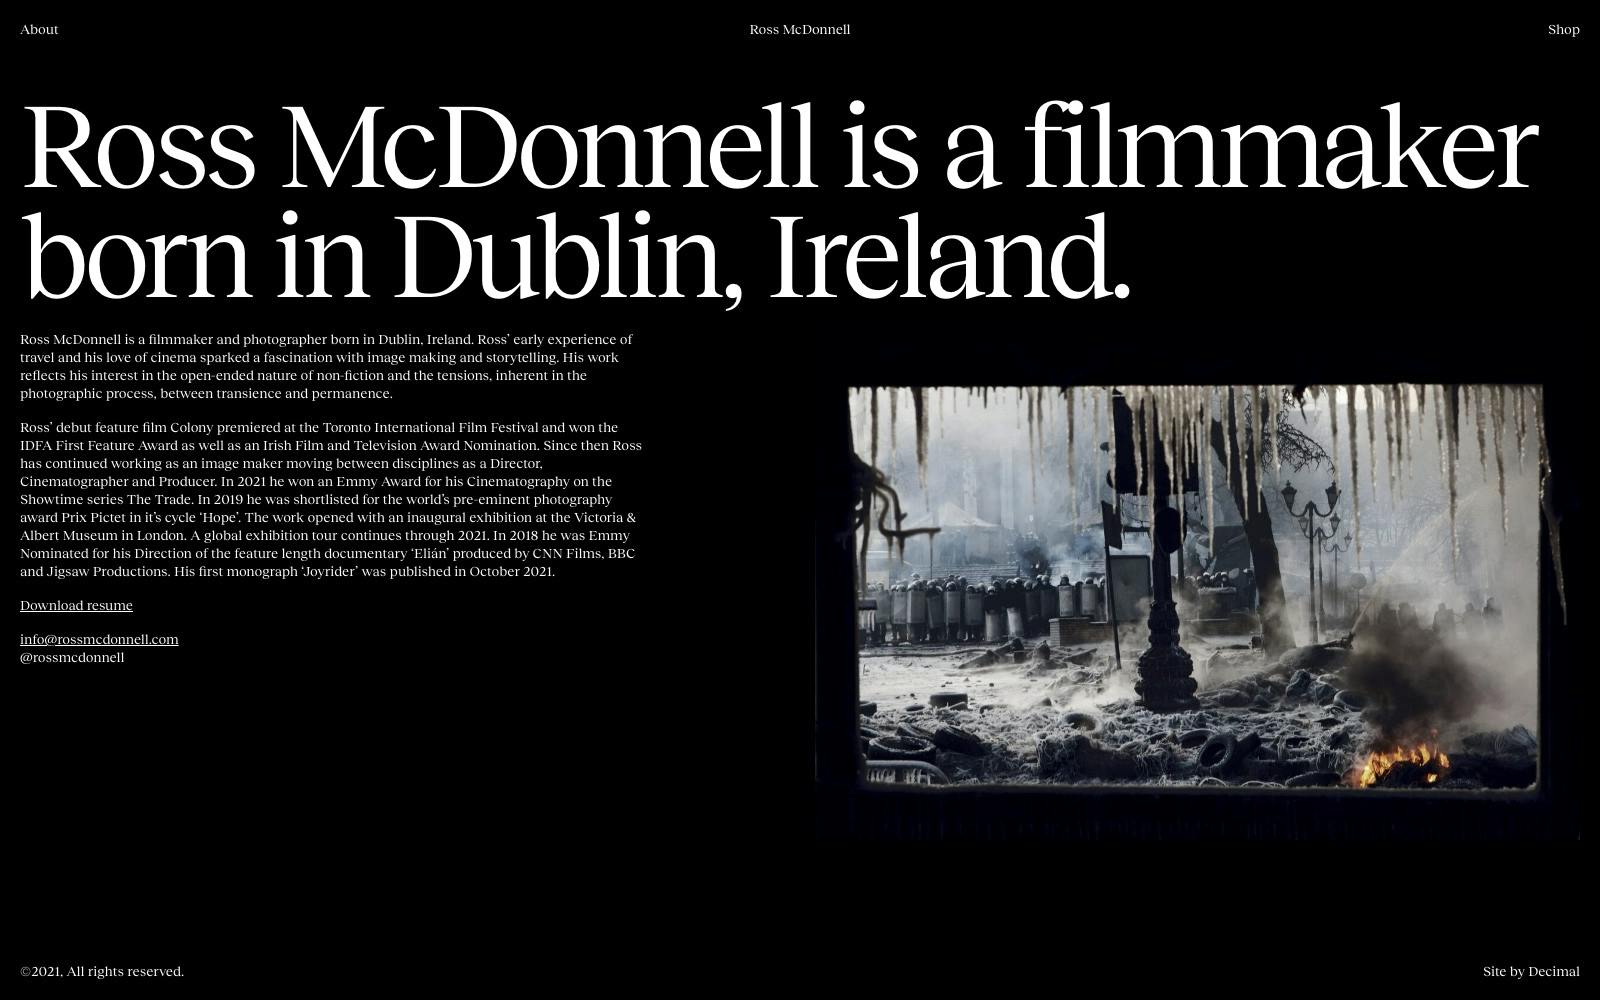 Screen recording of the about page of Ross McDonnells' new site.